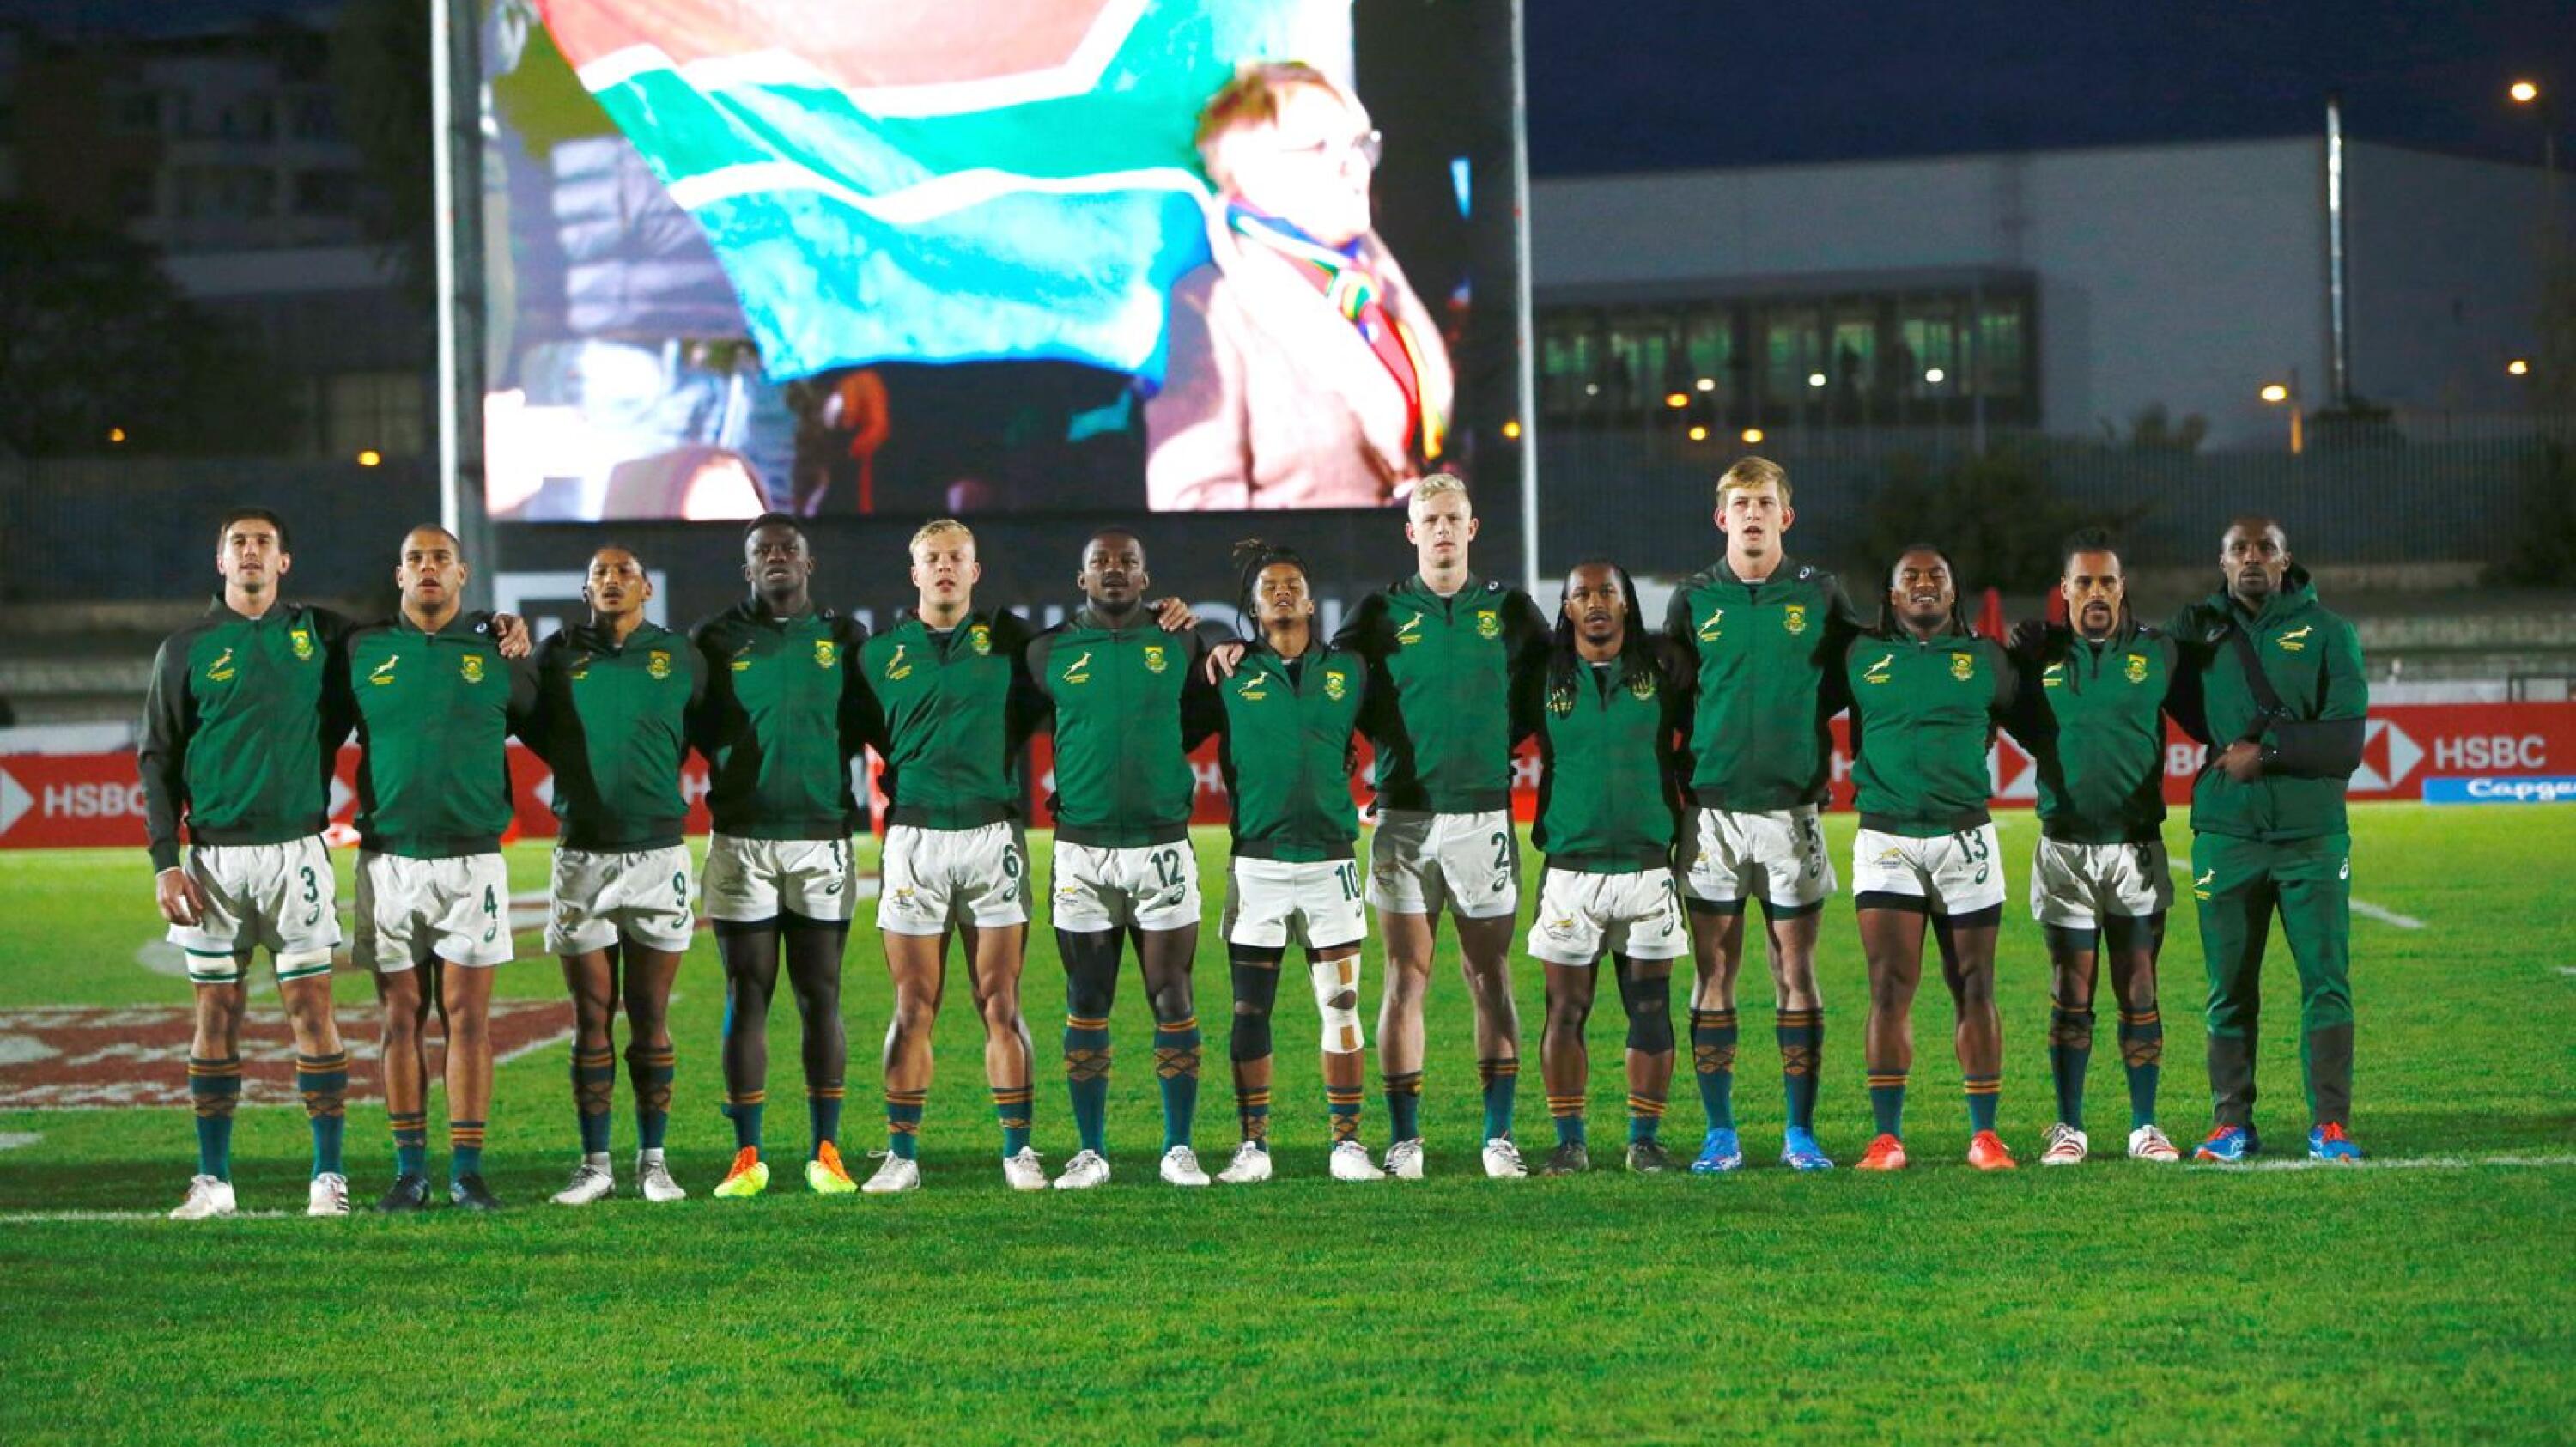 After a tight first half, Neil Powell’s Blitzboks recovered impressively in the second to seal a dominant win over Australia in Sunday’s gold medal final in Seville